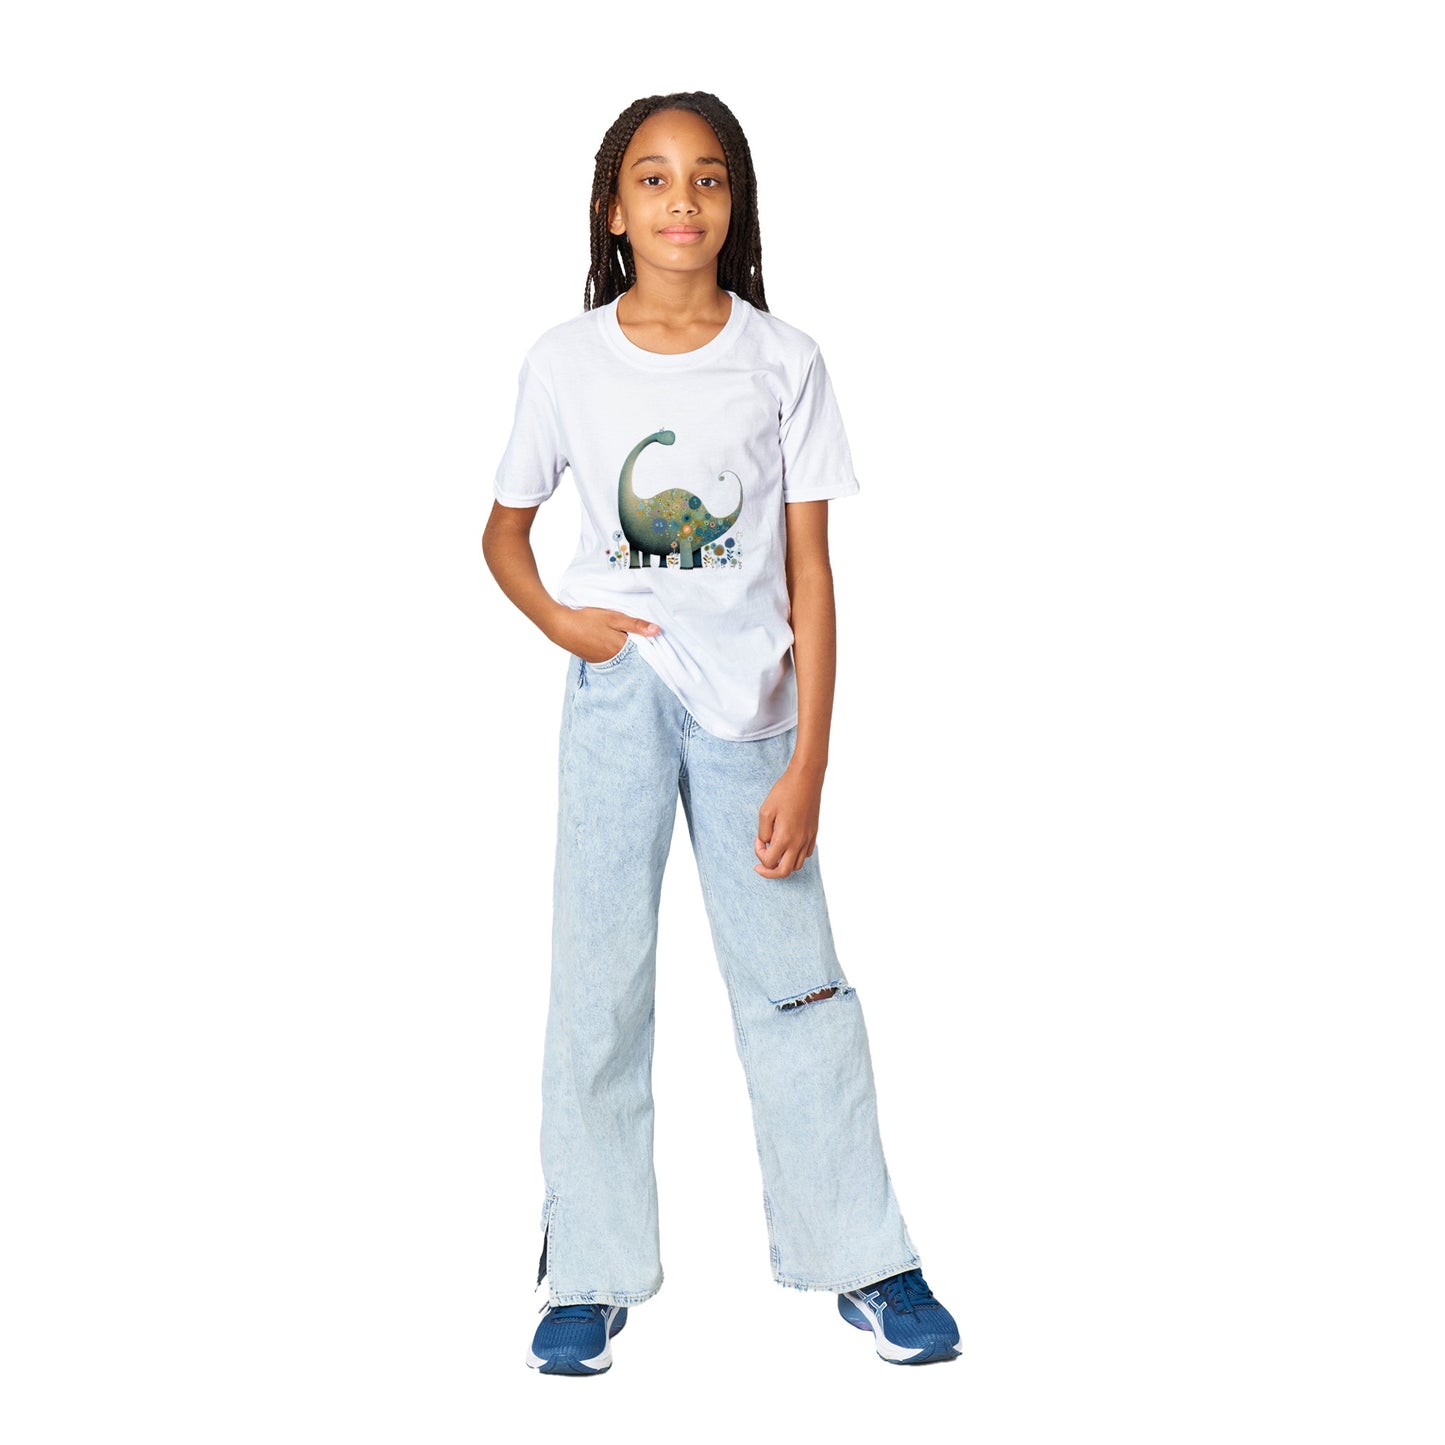 Adorable Floral Brontosaurus Kids T-Shirt - Perfect for Playtime and Beyond